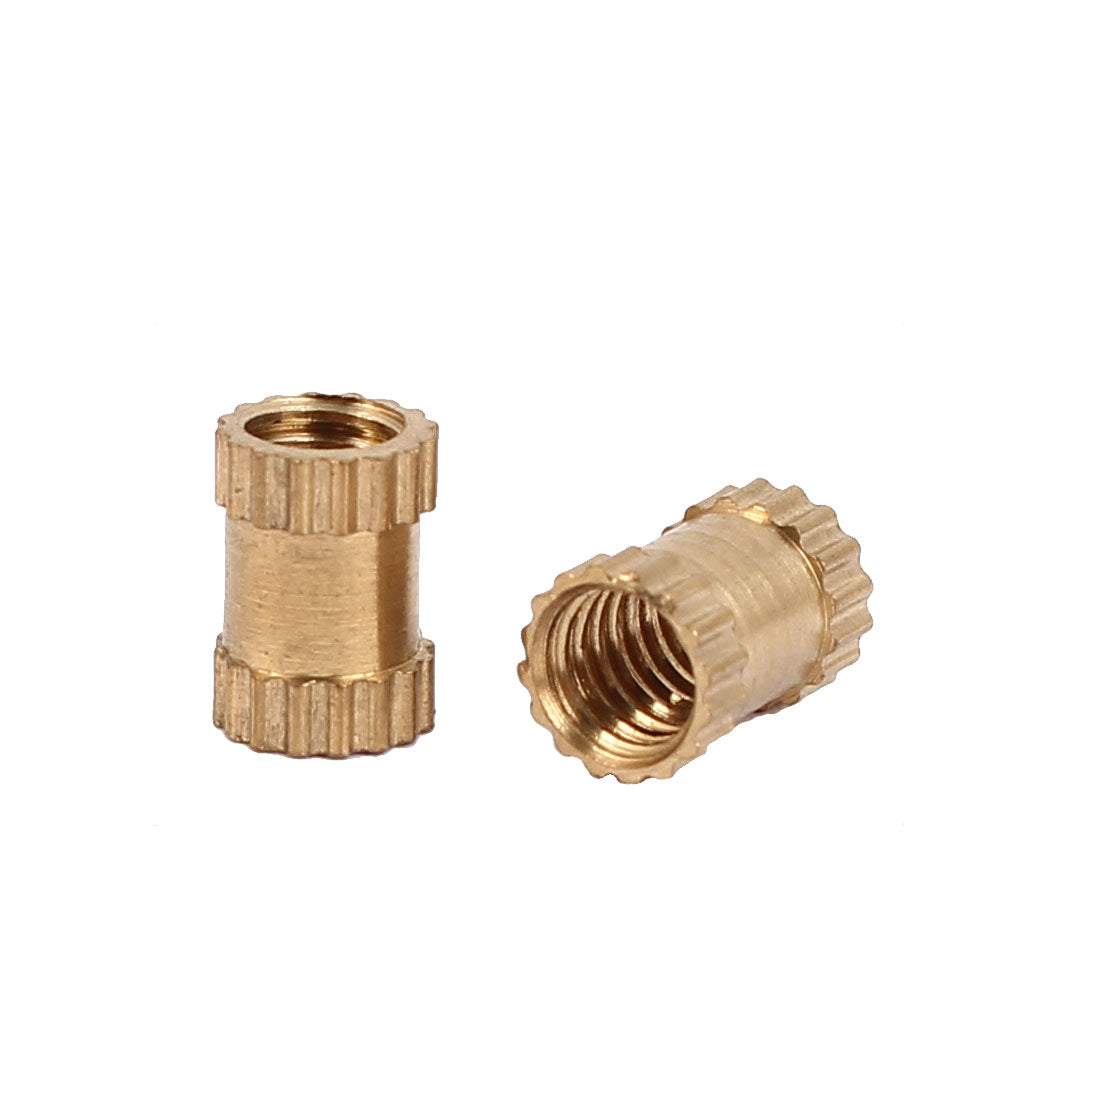 uxcell Uxcell M4 x 7mm Brass Cylinder Injection Molding Knurled Insert Embedded Nuts 100PCS